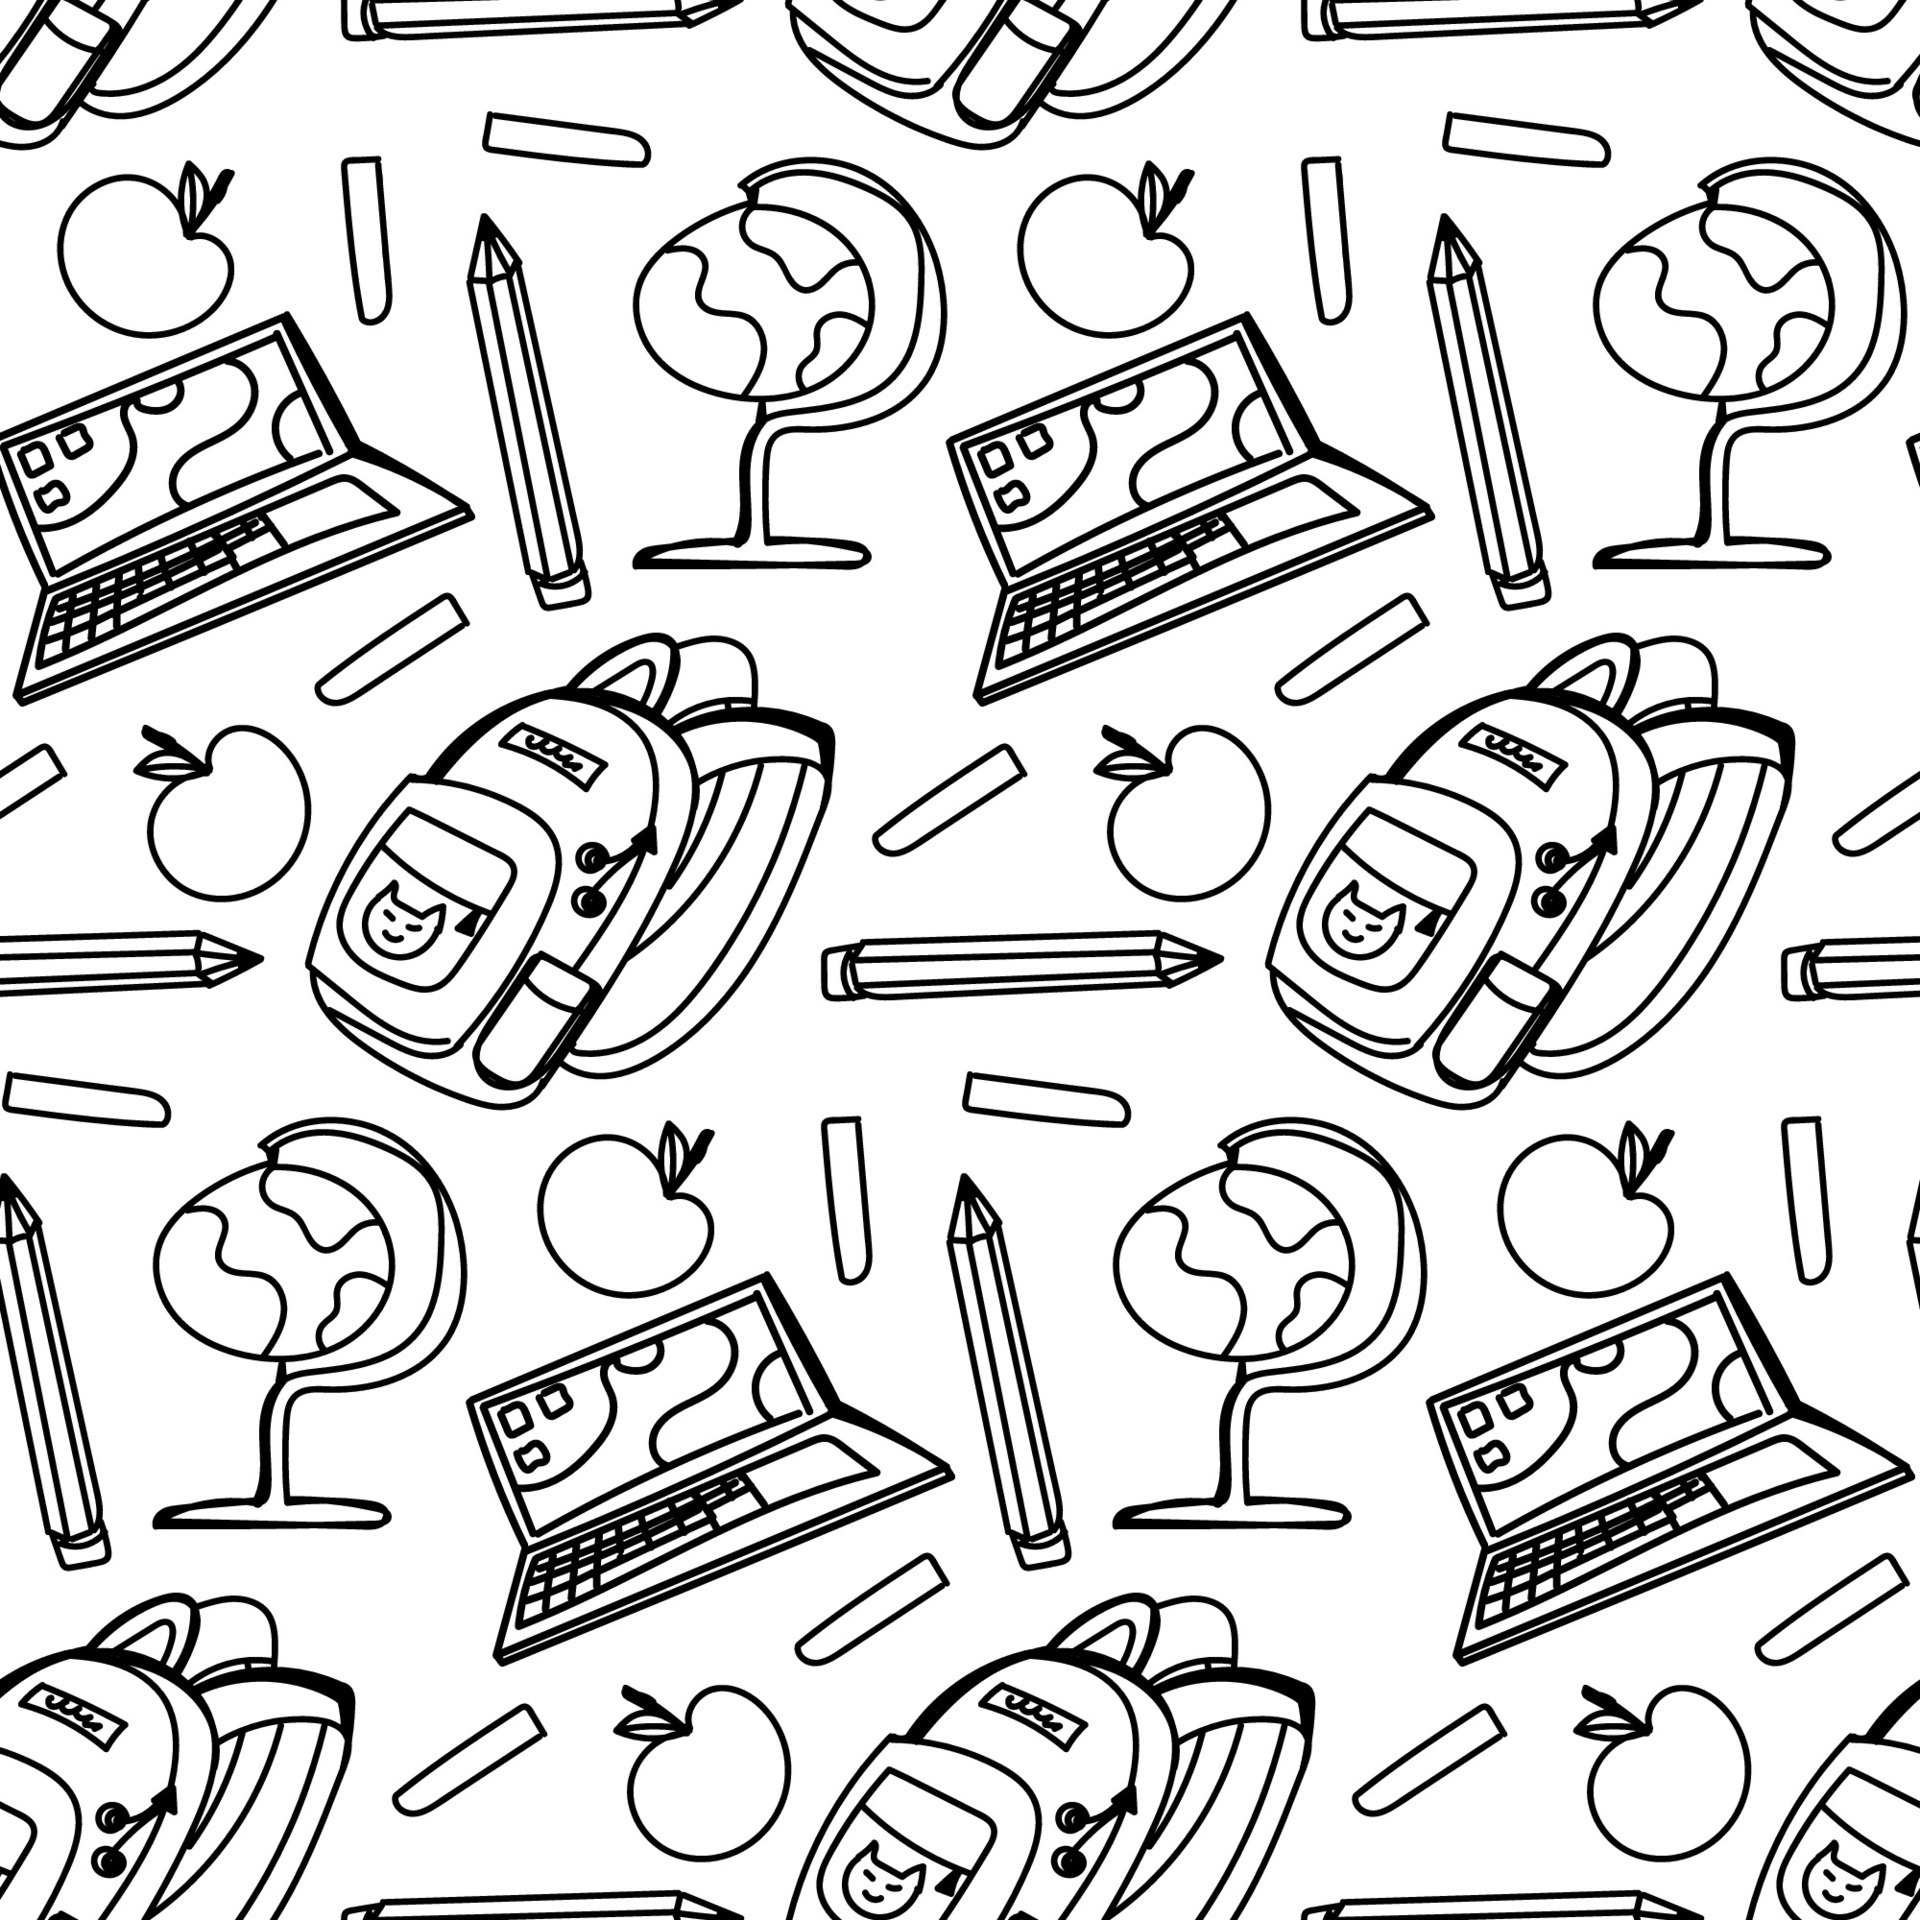 https://static.vecteezy.com/system/resources/previews/026/831/307/original/school-doodle-illustration-seamless-pattern-the-pattern-can-be-printed-and-used-for-various-art-and-craft-projects-such-as-scrapbooking-card-making-or-diy-school-themed-decorations-vector.jpg